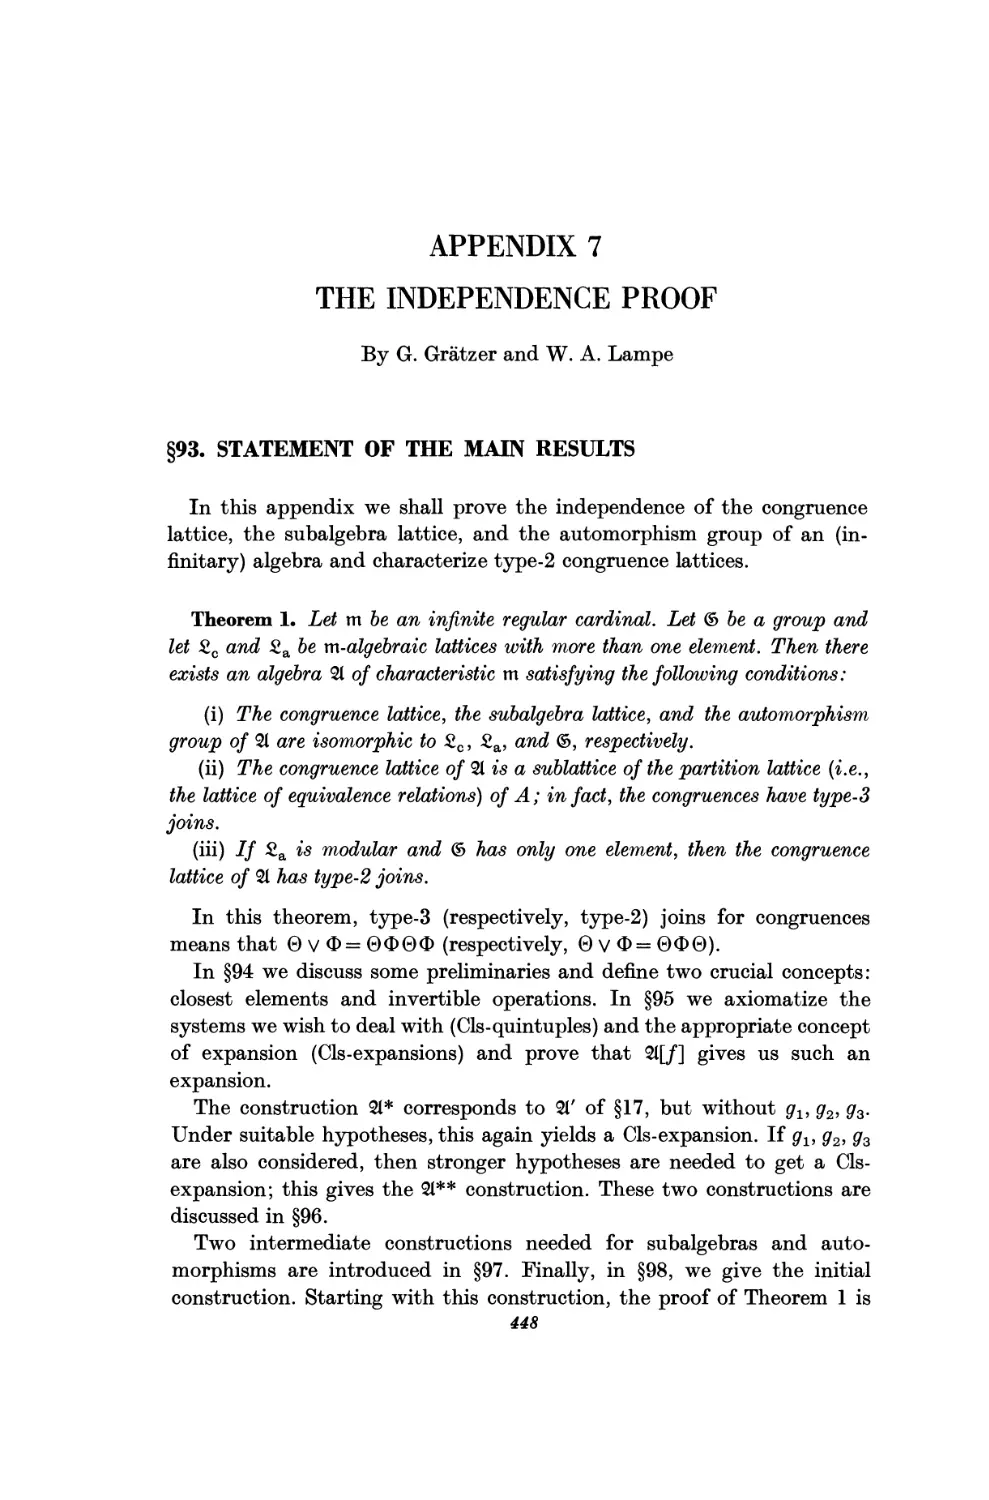 Appendix 7. The Independence Proof